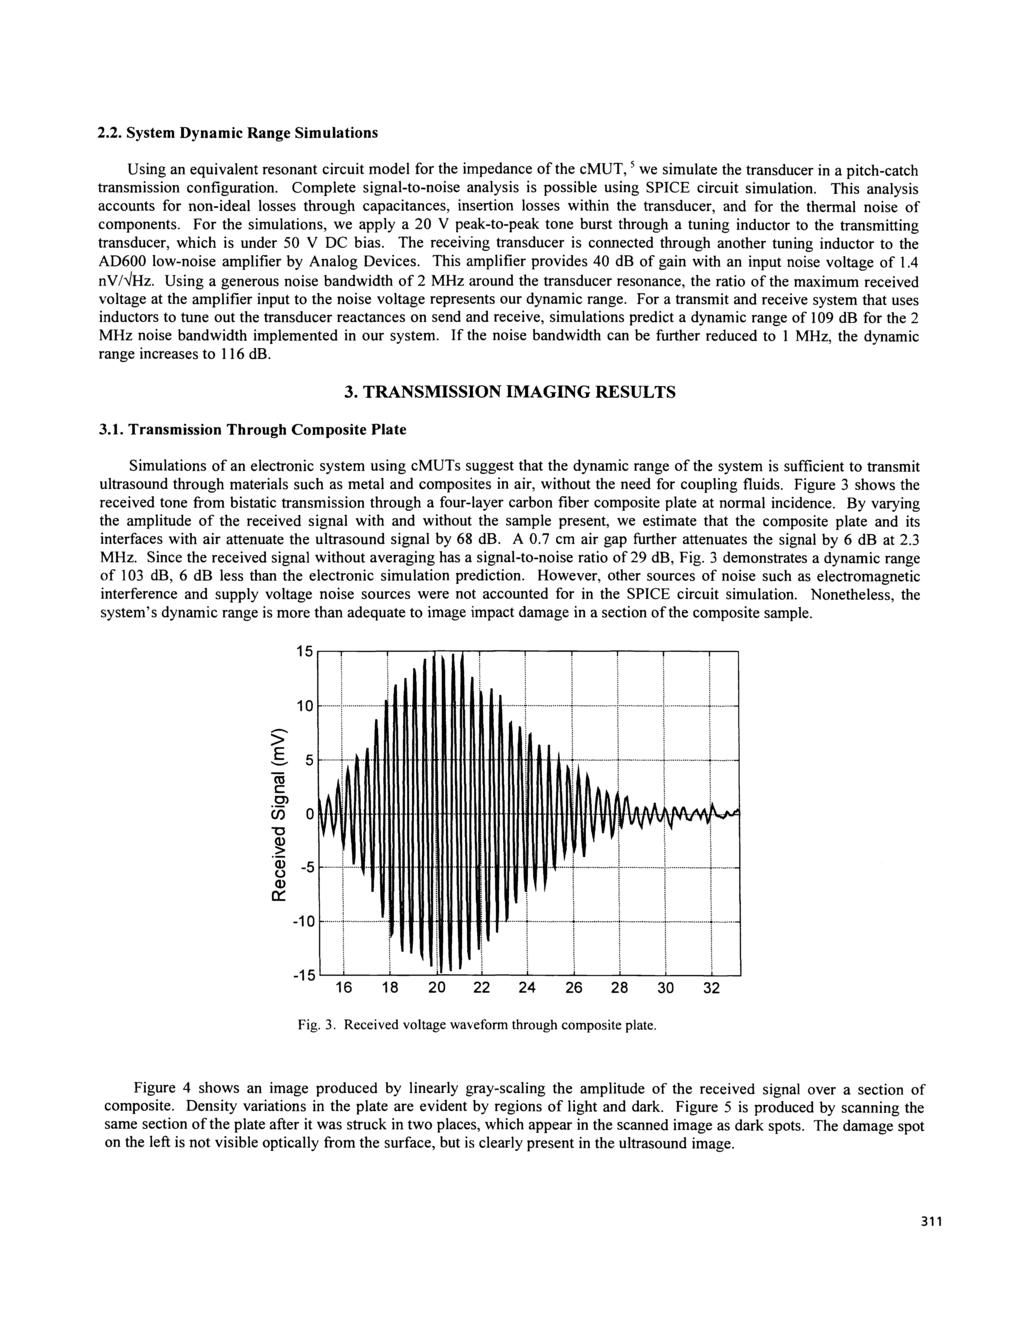 2.2. System Dynamic Range Simulations Using an equivalent resonant circuit model for the impedance of the cmut, we simulate the transducer in a pitch-catch transmission configuration.